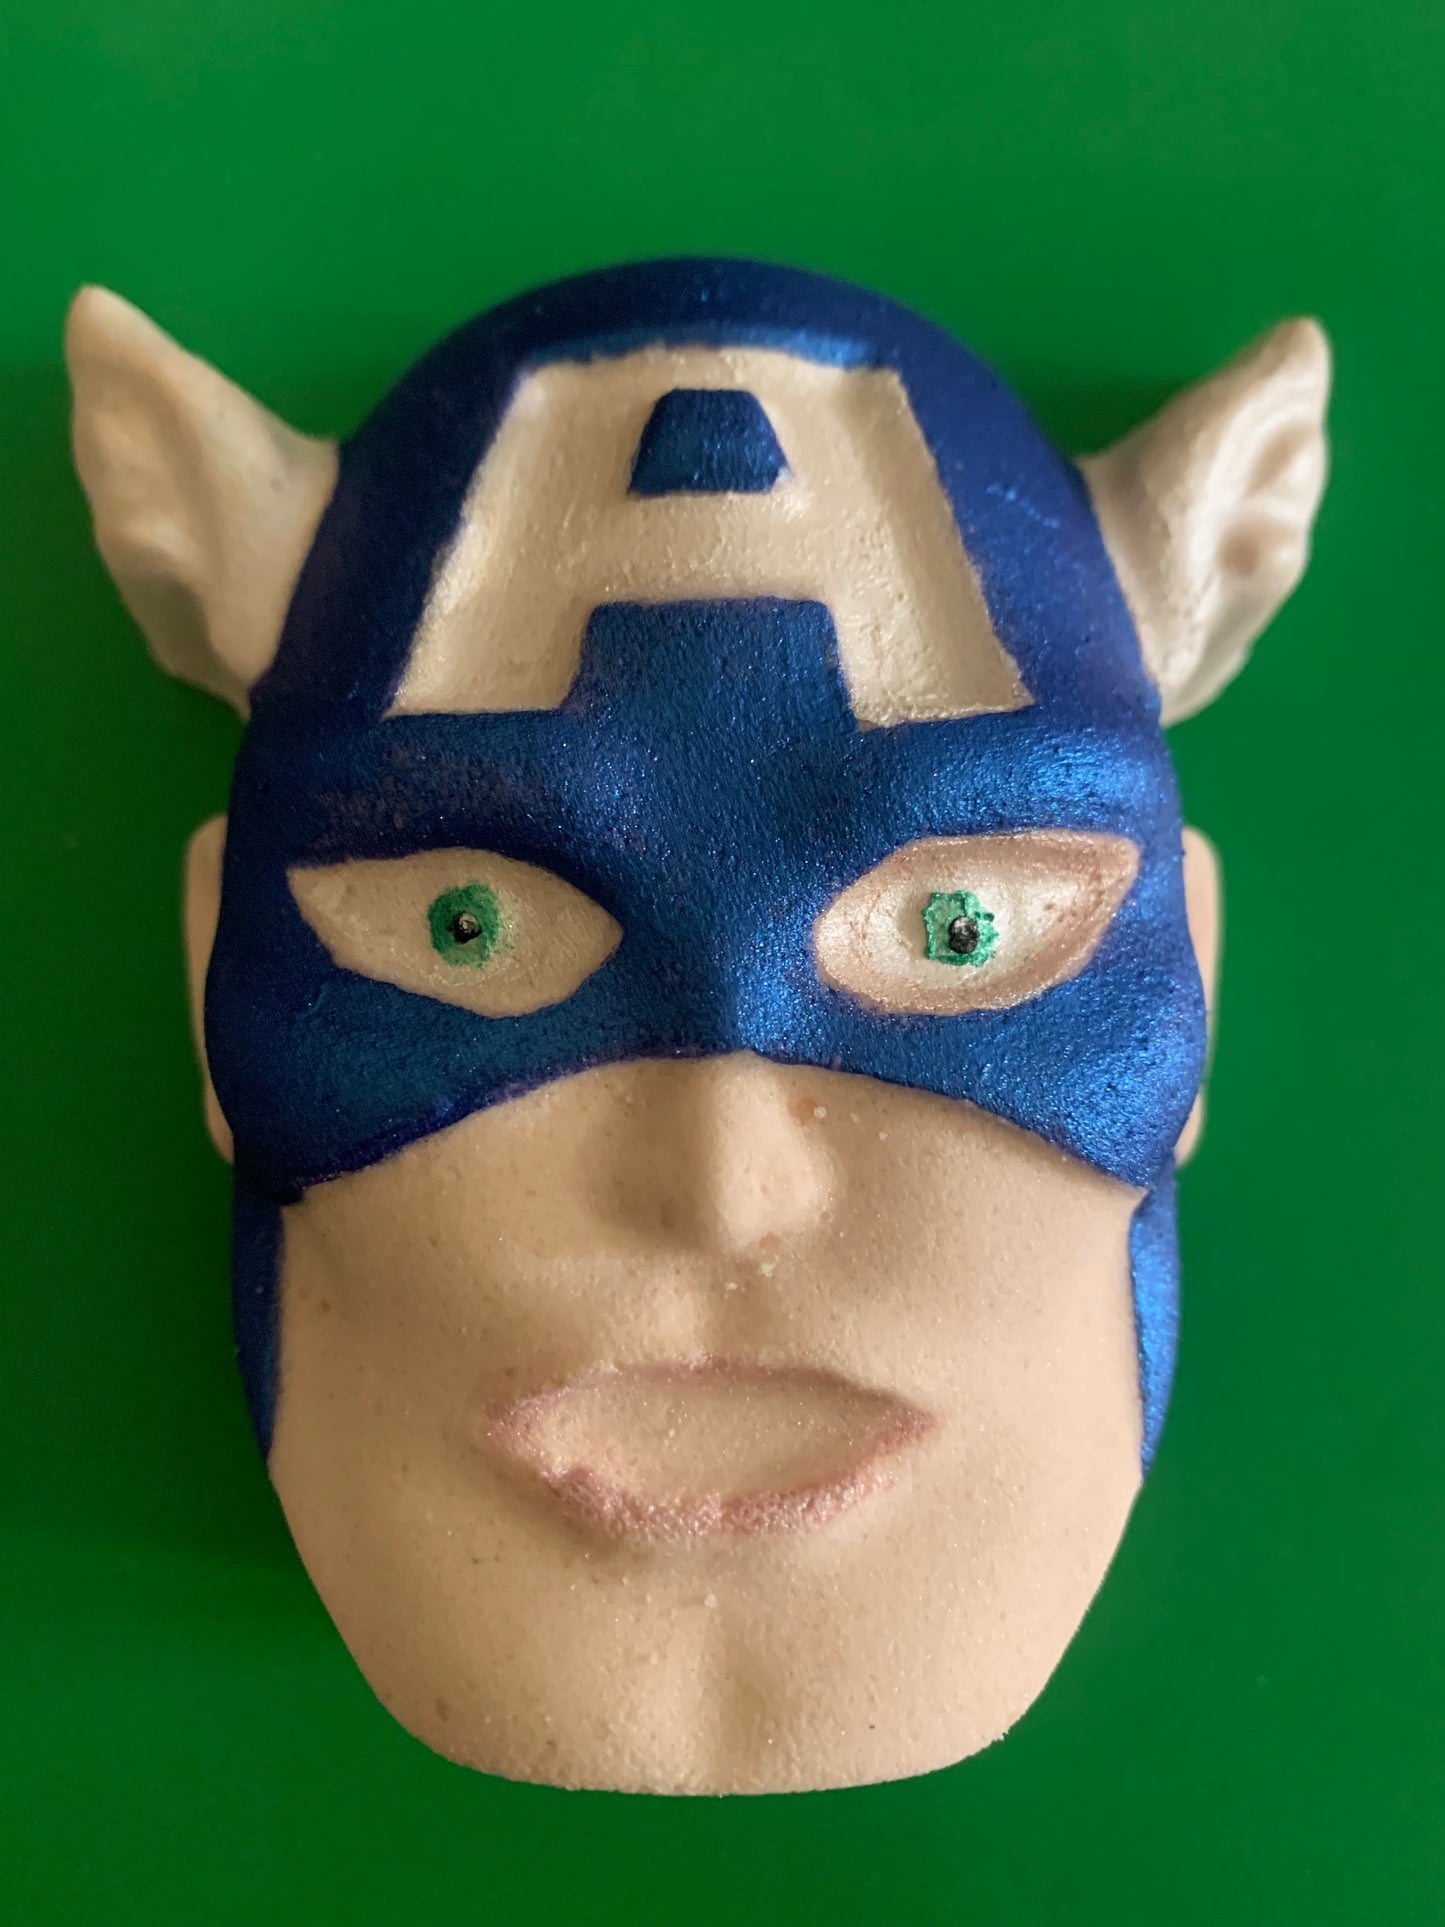 Captain American Hero Bath Bomb with Surprise Toy Figure Inside